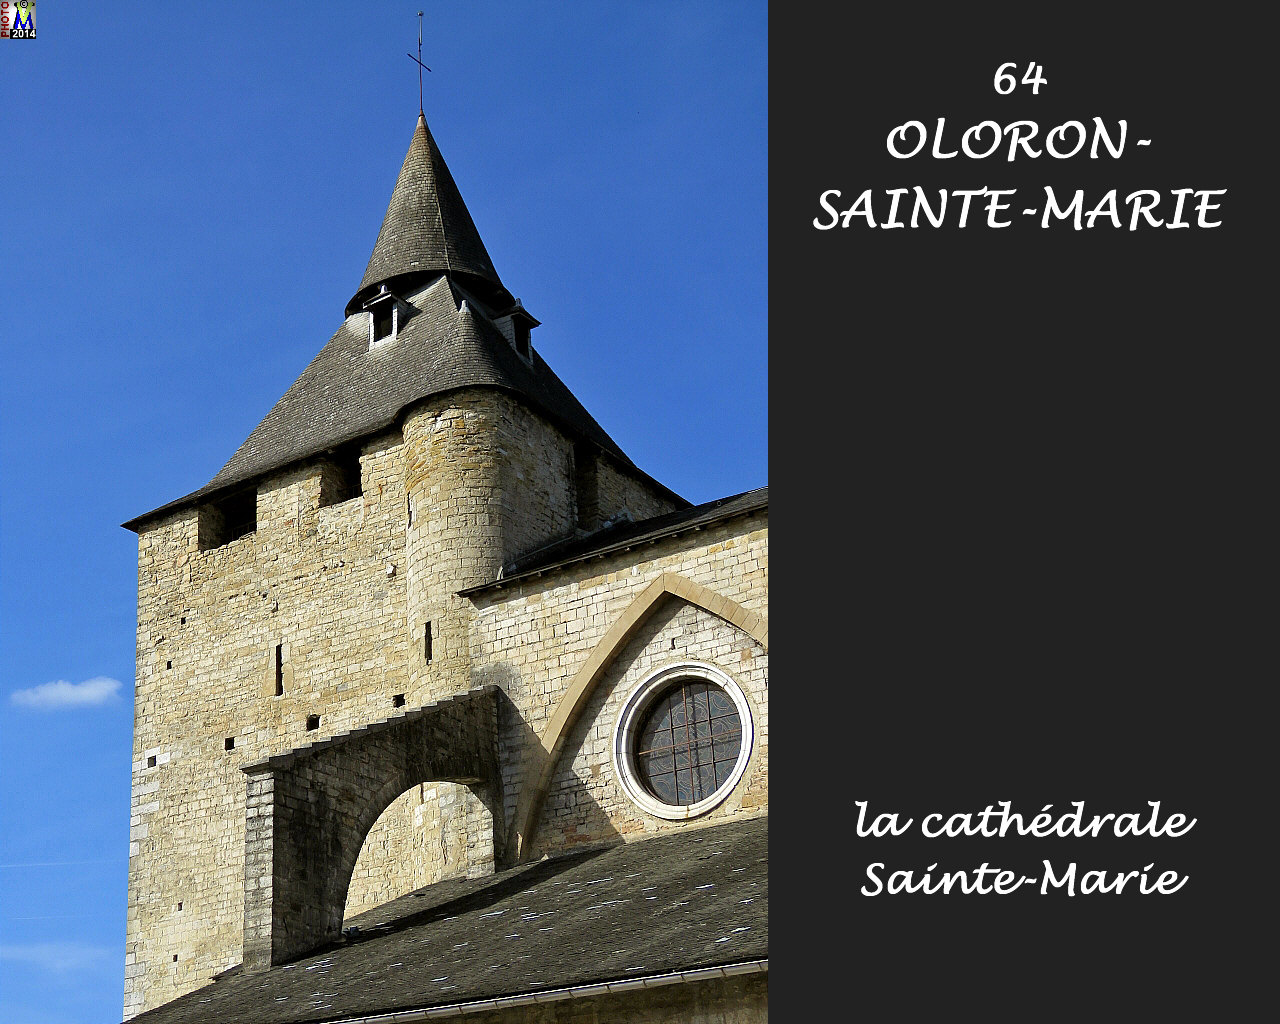 64OLORON-STE-MARIE_cathedrale_110.jpg